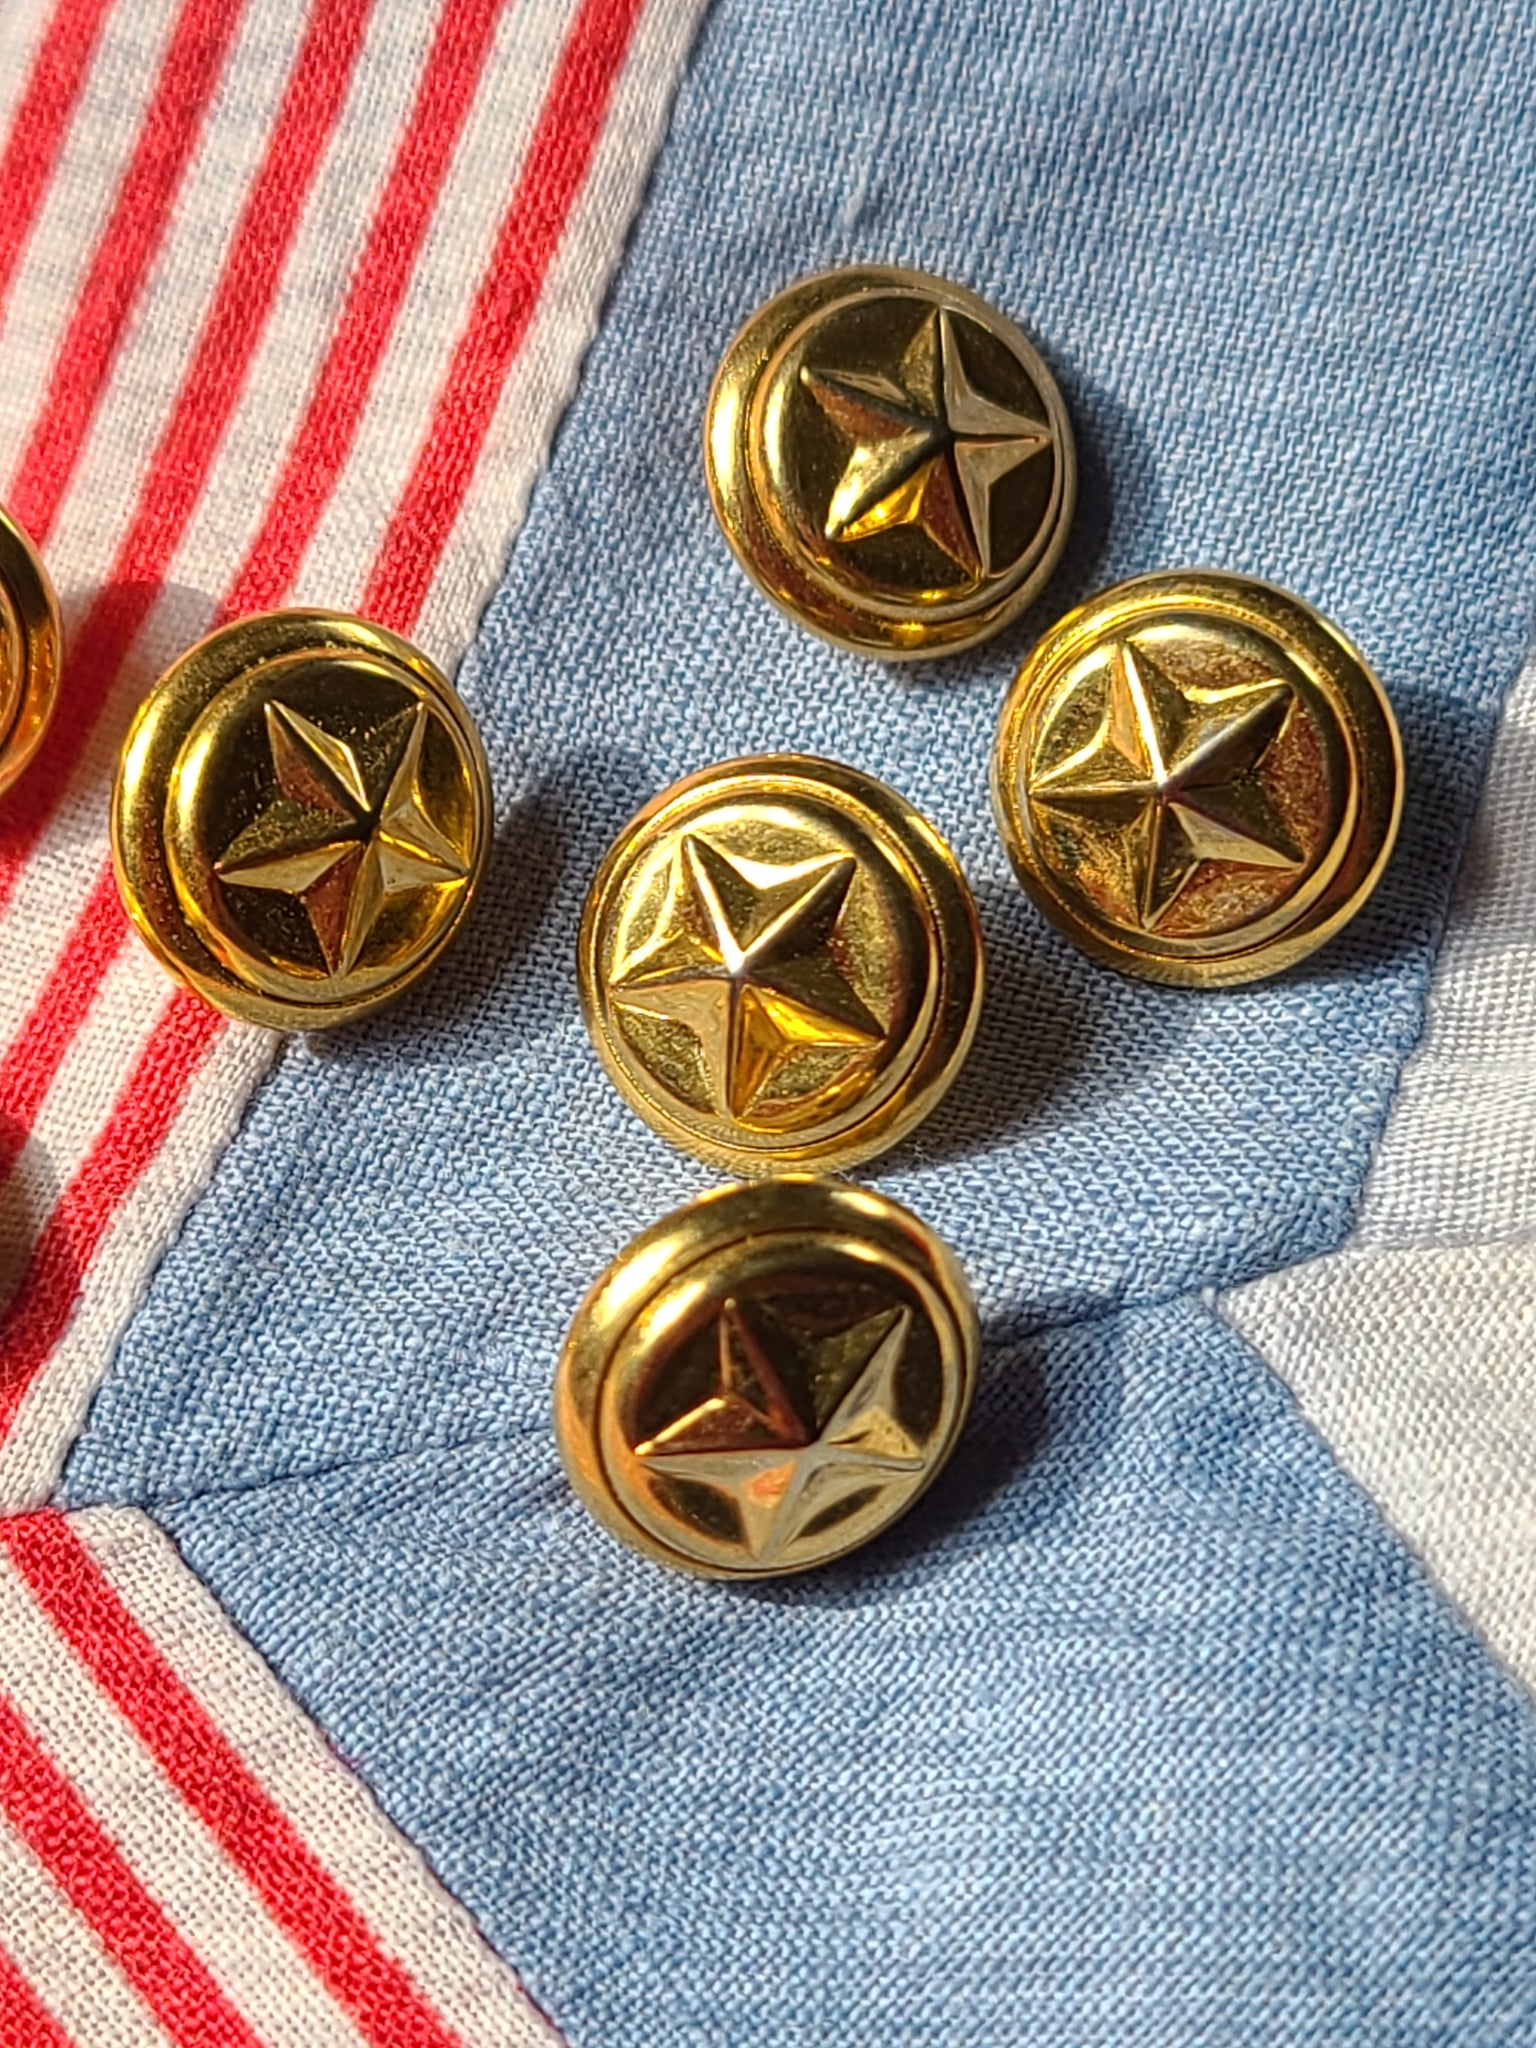 Gold Star Buttons – At the Sign of the Golden Scissors